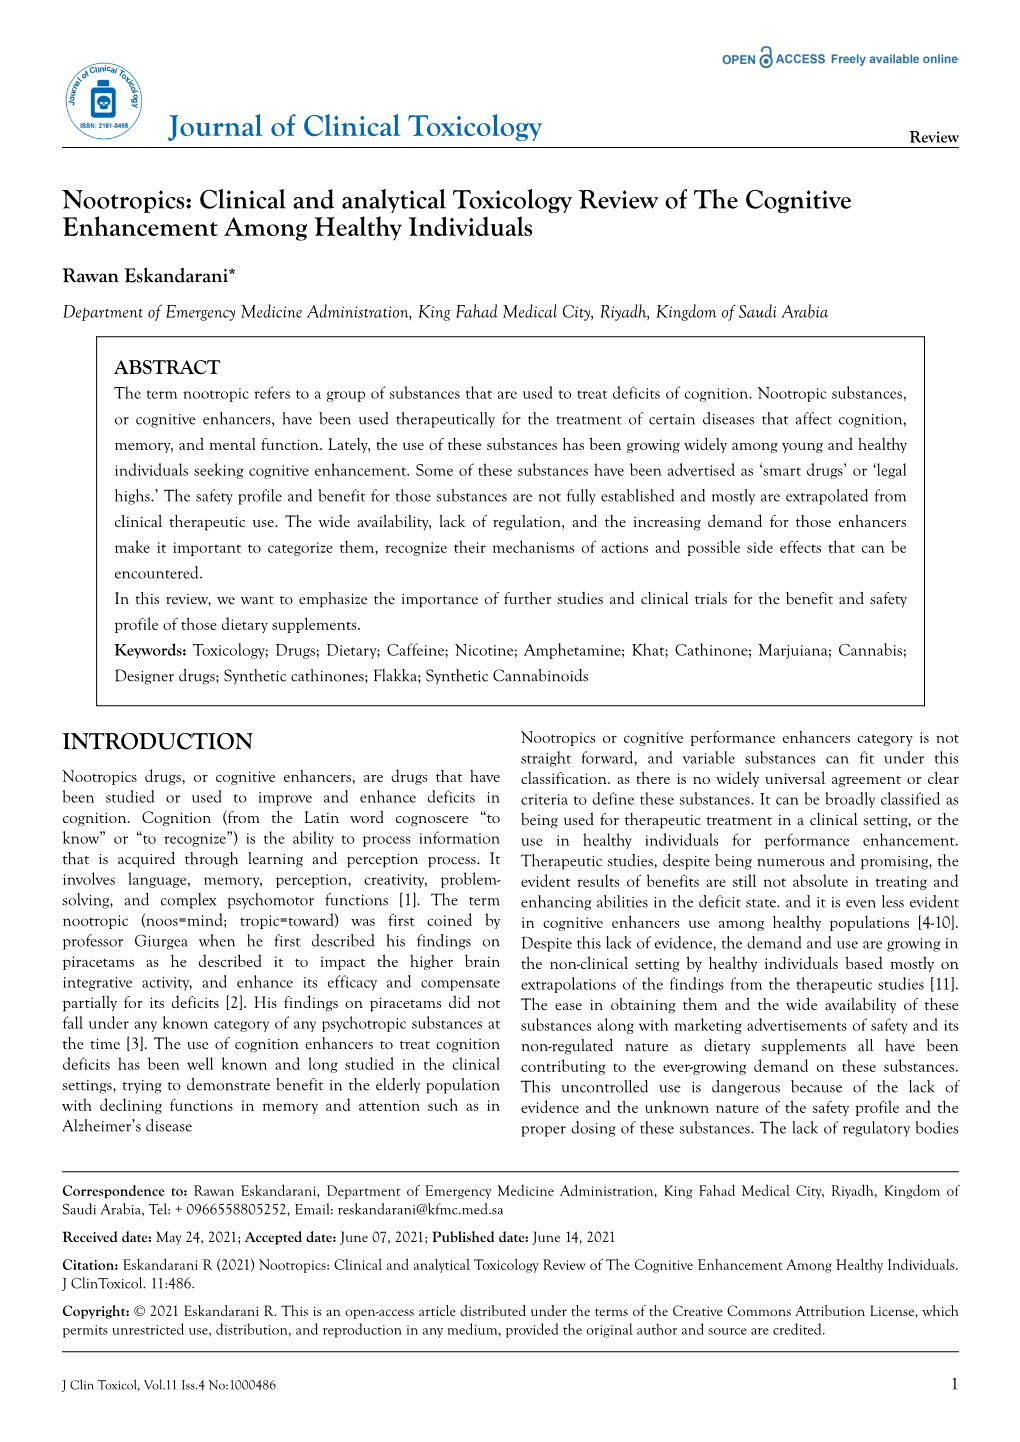 Nootropics: Clinical and Analytical Toxicology Review of the Cognitive Enhancement Among Healthy Individuals